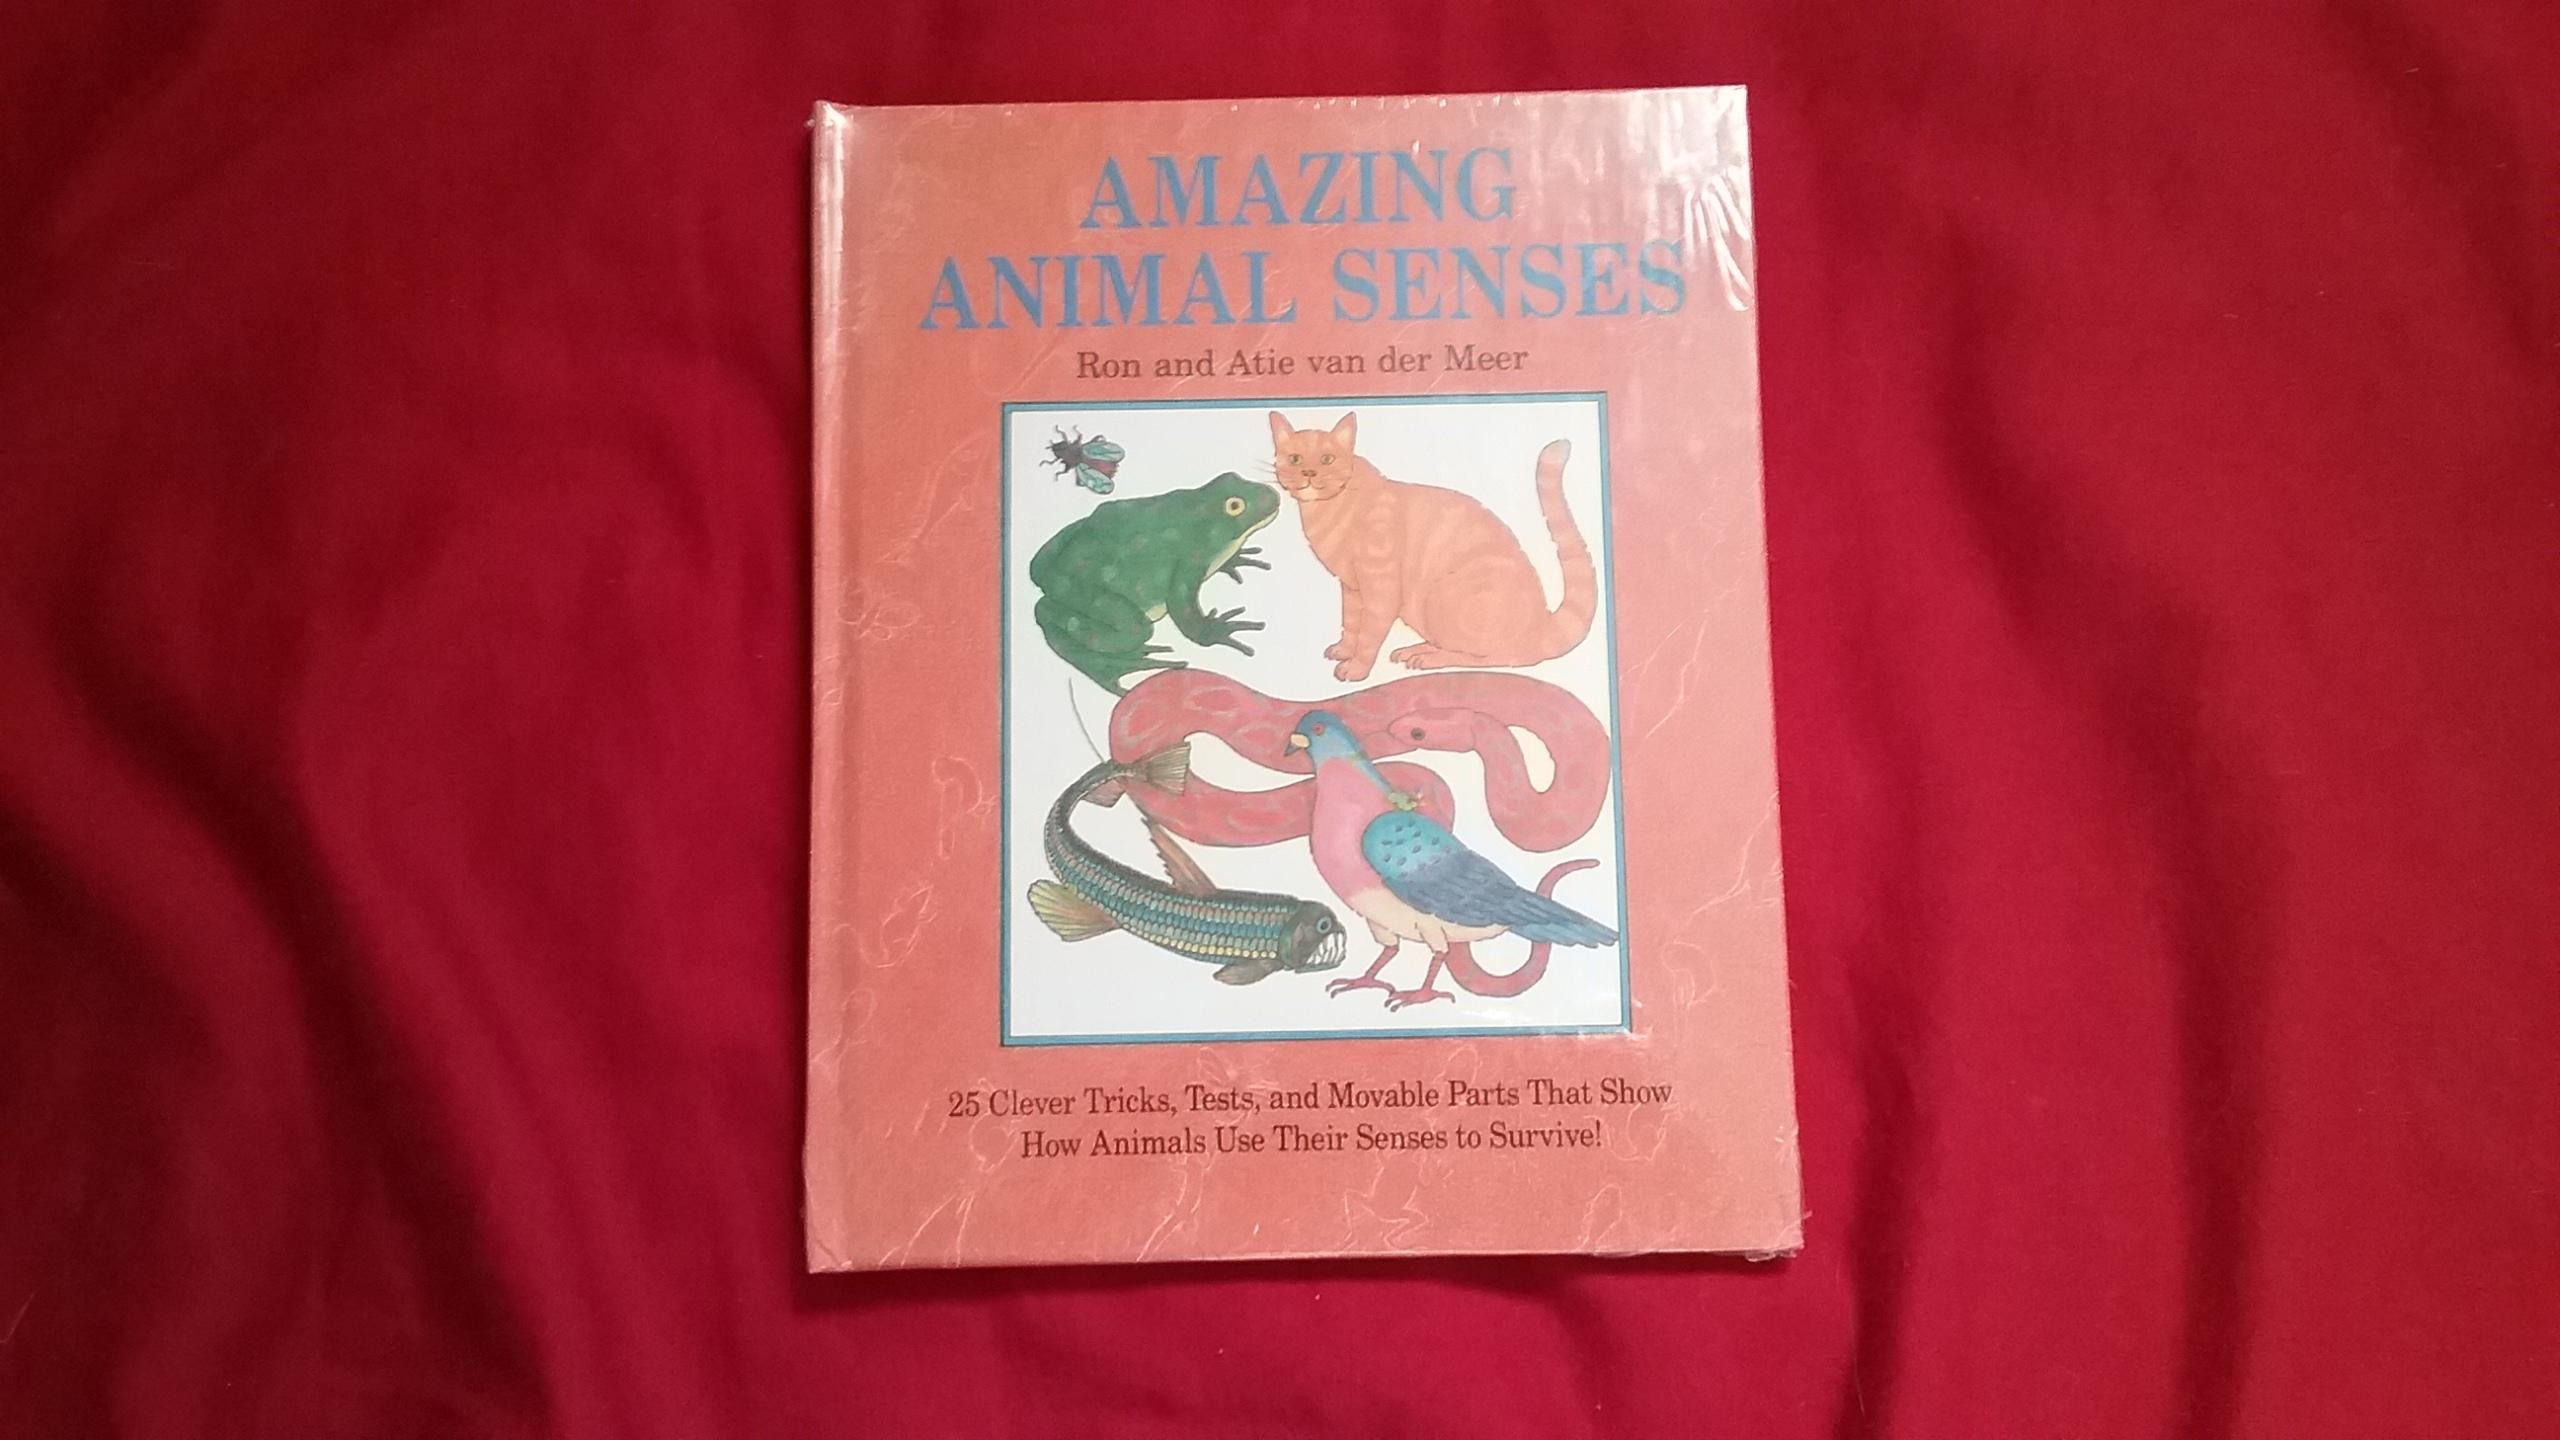 Amazing Animal Senses: An Action Book That Shows You How Animals Use Their  Magical, Super Senses to Survive by Van der Meer, Ron and Atie: Good  Pictorial Cover (1990) First Edition |